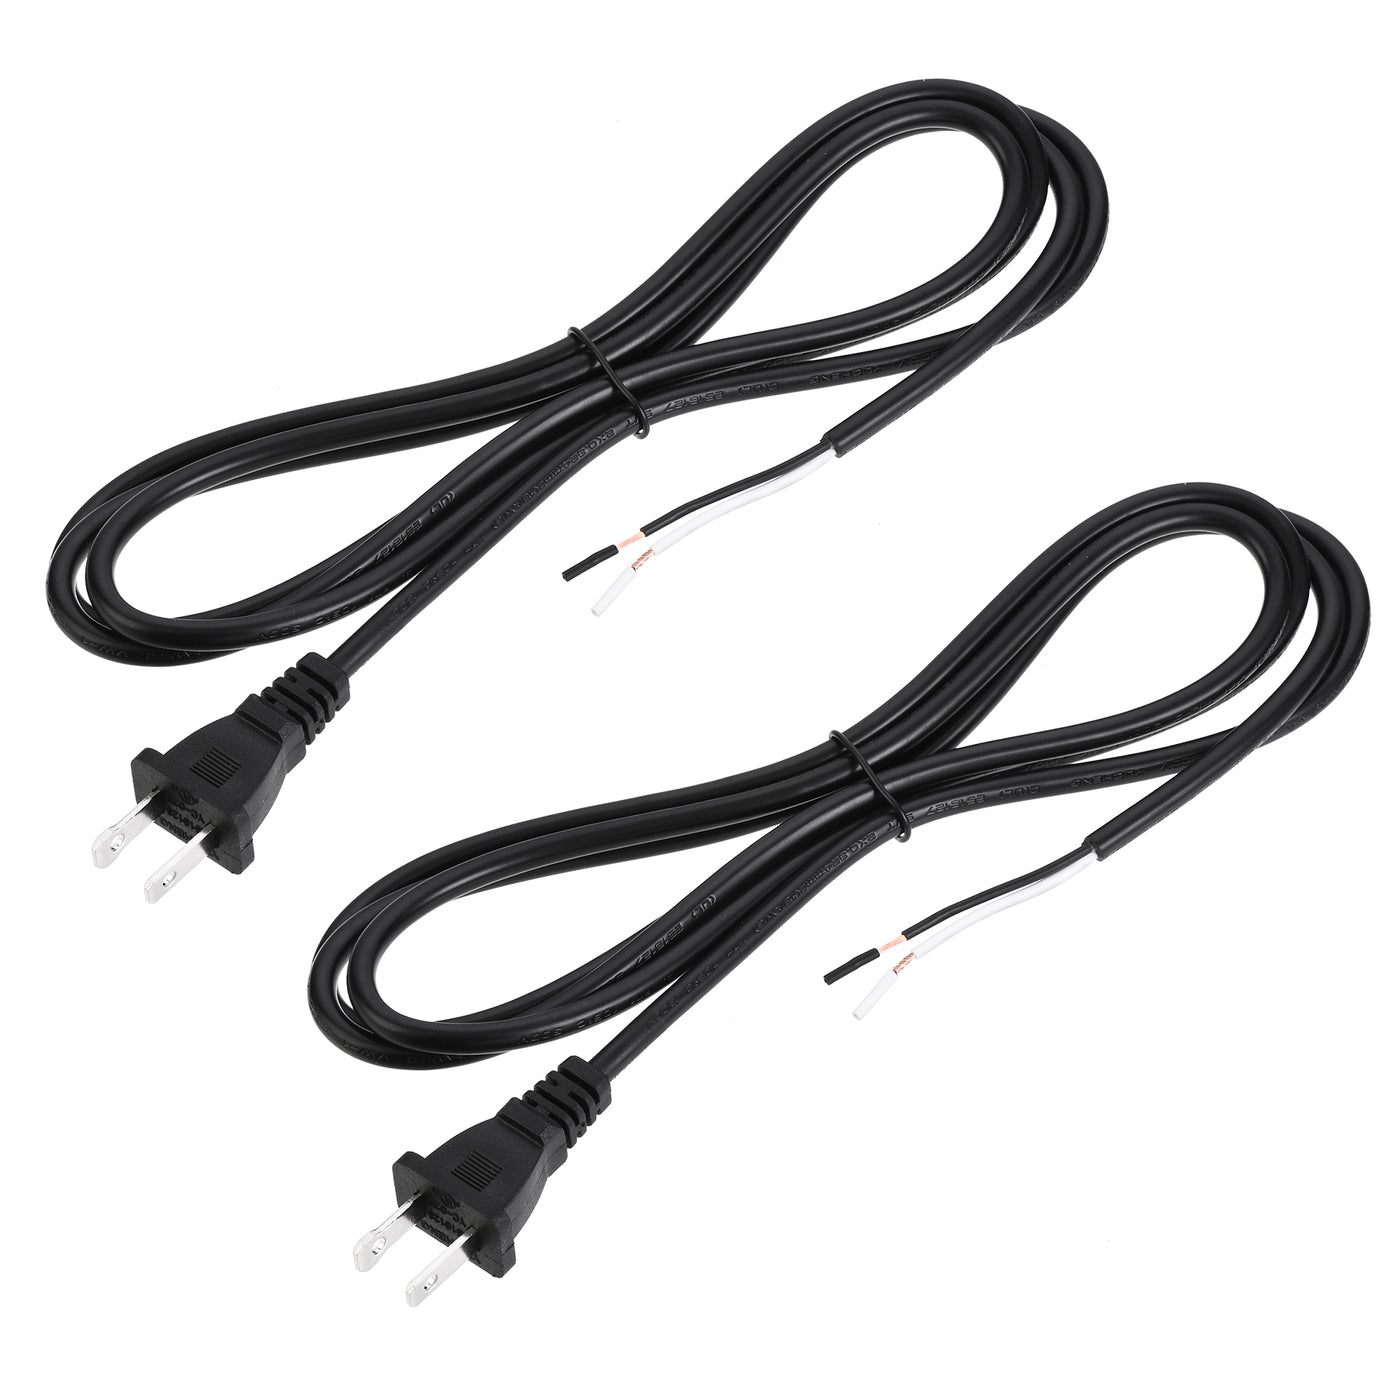 uxcell Uxcell US Plug Lamp Cord, SVT 18AWG Power Wire 1.8M Black, UL Listed, Pack of 2